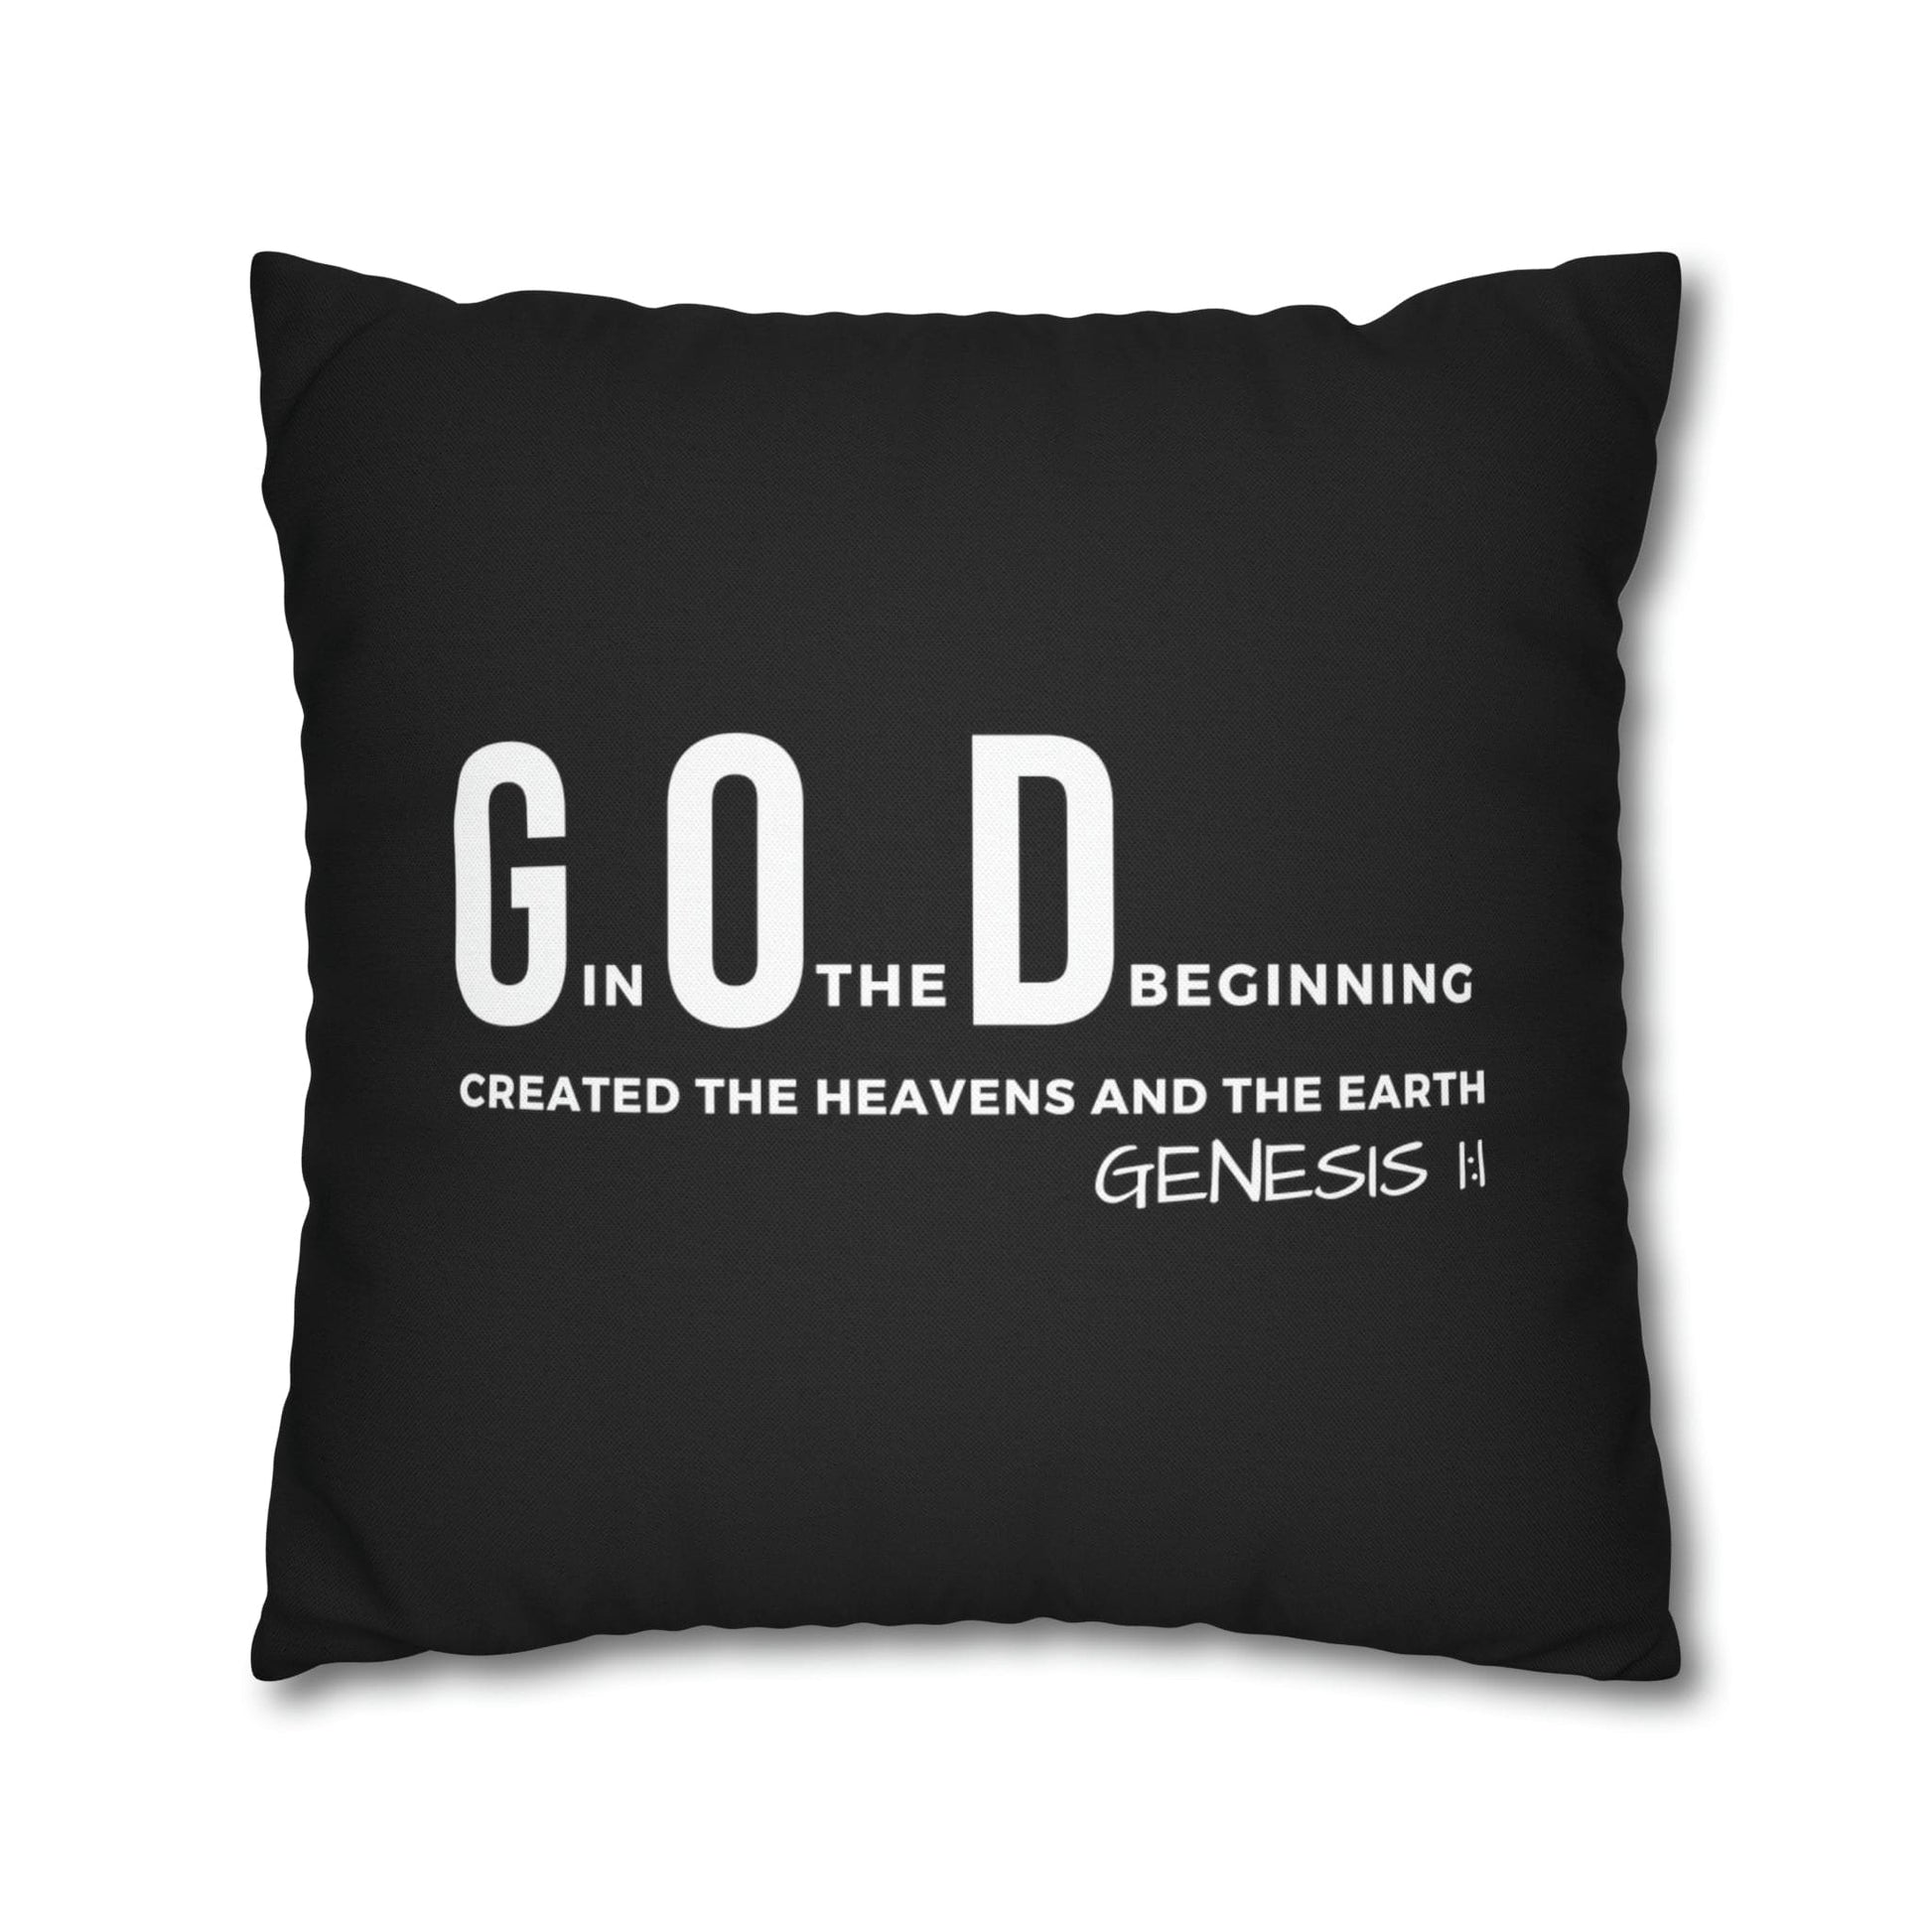 Decorative Throw Pillow Cover - Set Of 2, God In The Beginning Created The Heavens And The Earth - Scripture Verse-5